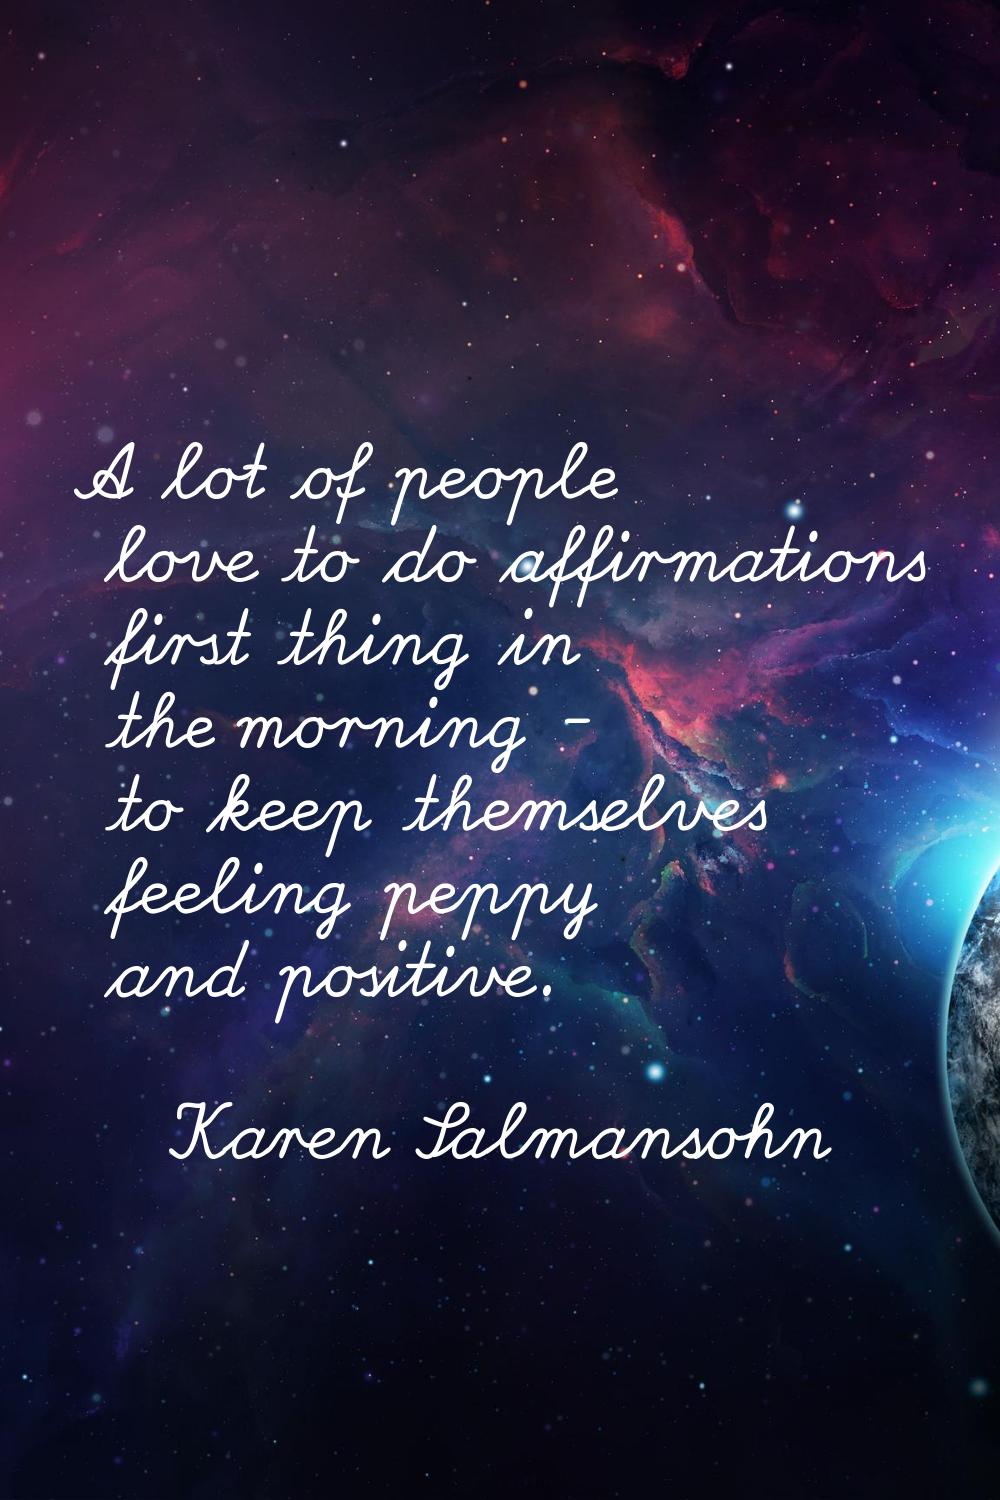 A lot of people love to do affirmations first thing in the morning - to keep themselves feeling pep